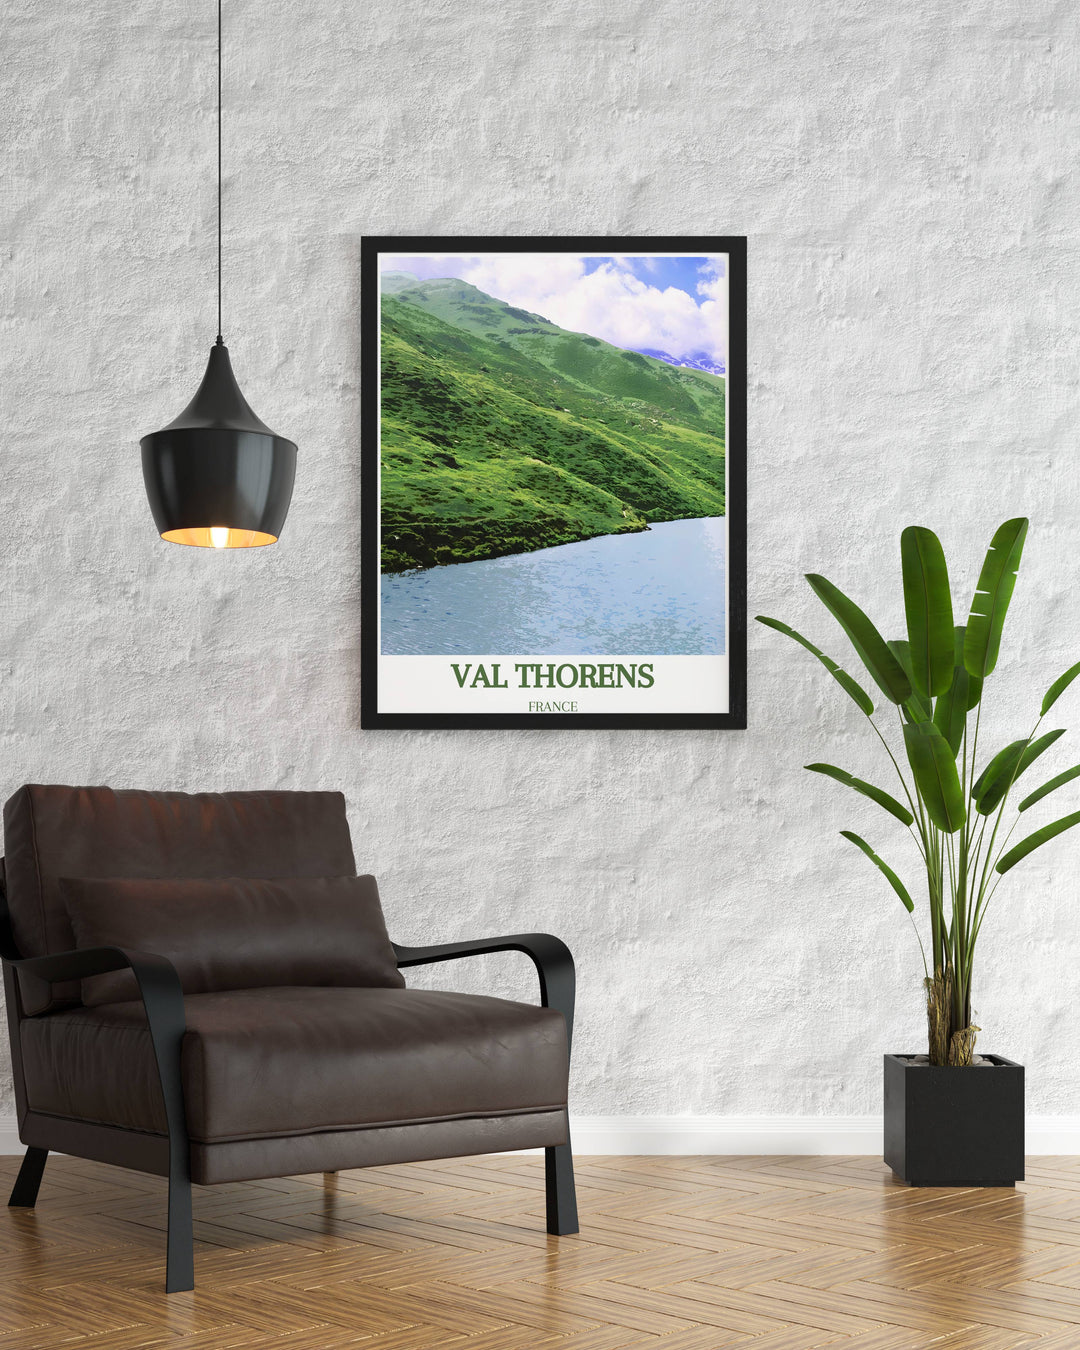 Val Thorens fine art print featuring the serene landscapes of Lac du Lou in the French Alps, offering a peaceful and inspiring view for your home decor.